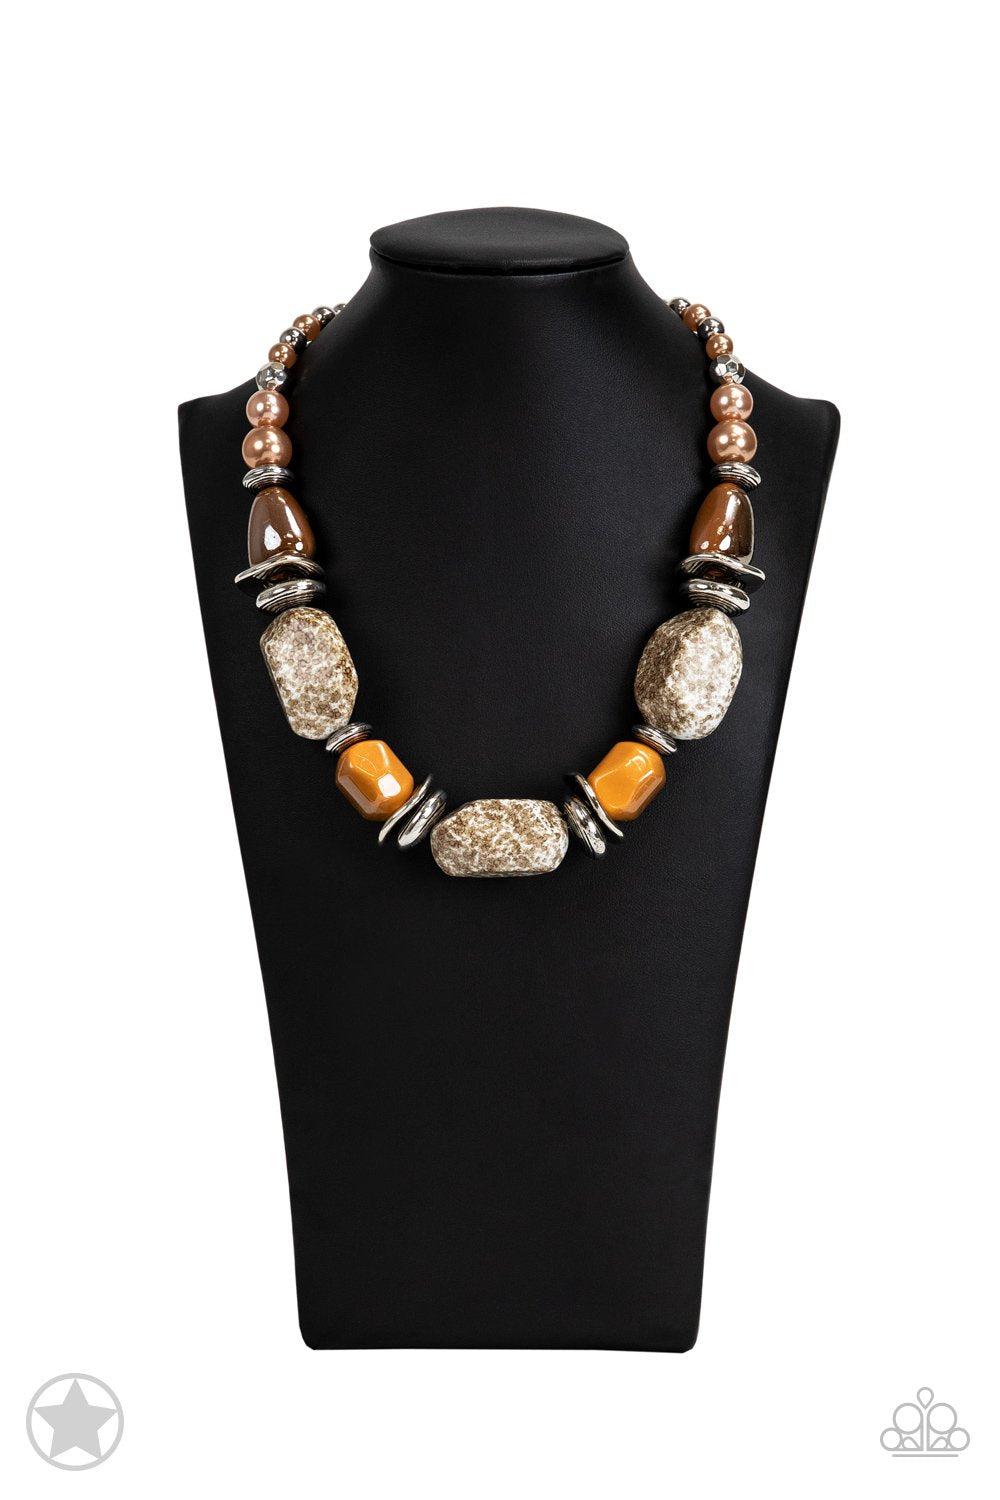 In Good Glazes Chunky Peach Necklace and matching Earrings - Paparazzi Accessories- on bust -CarasShop.com - $5 Jewelry by Cara Jewels